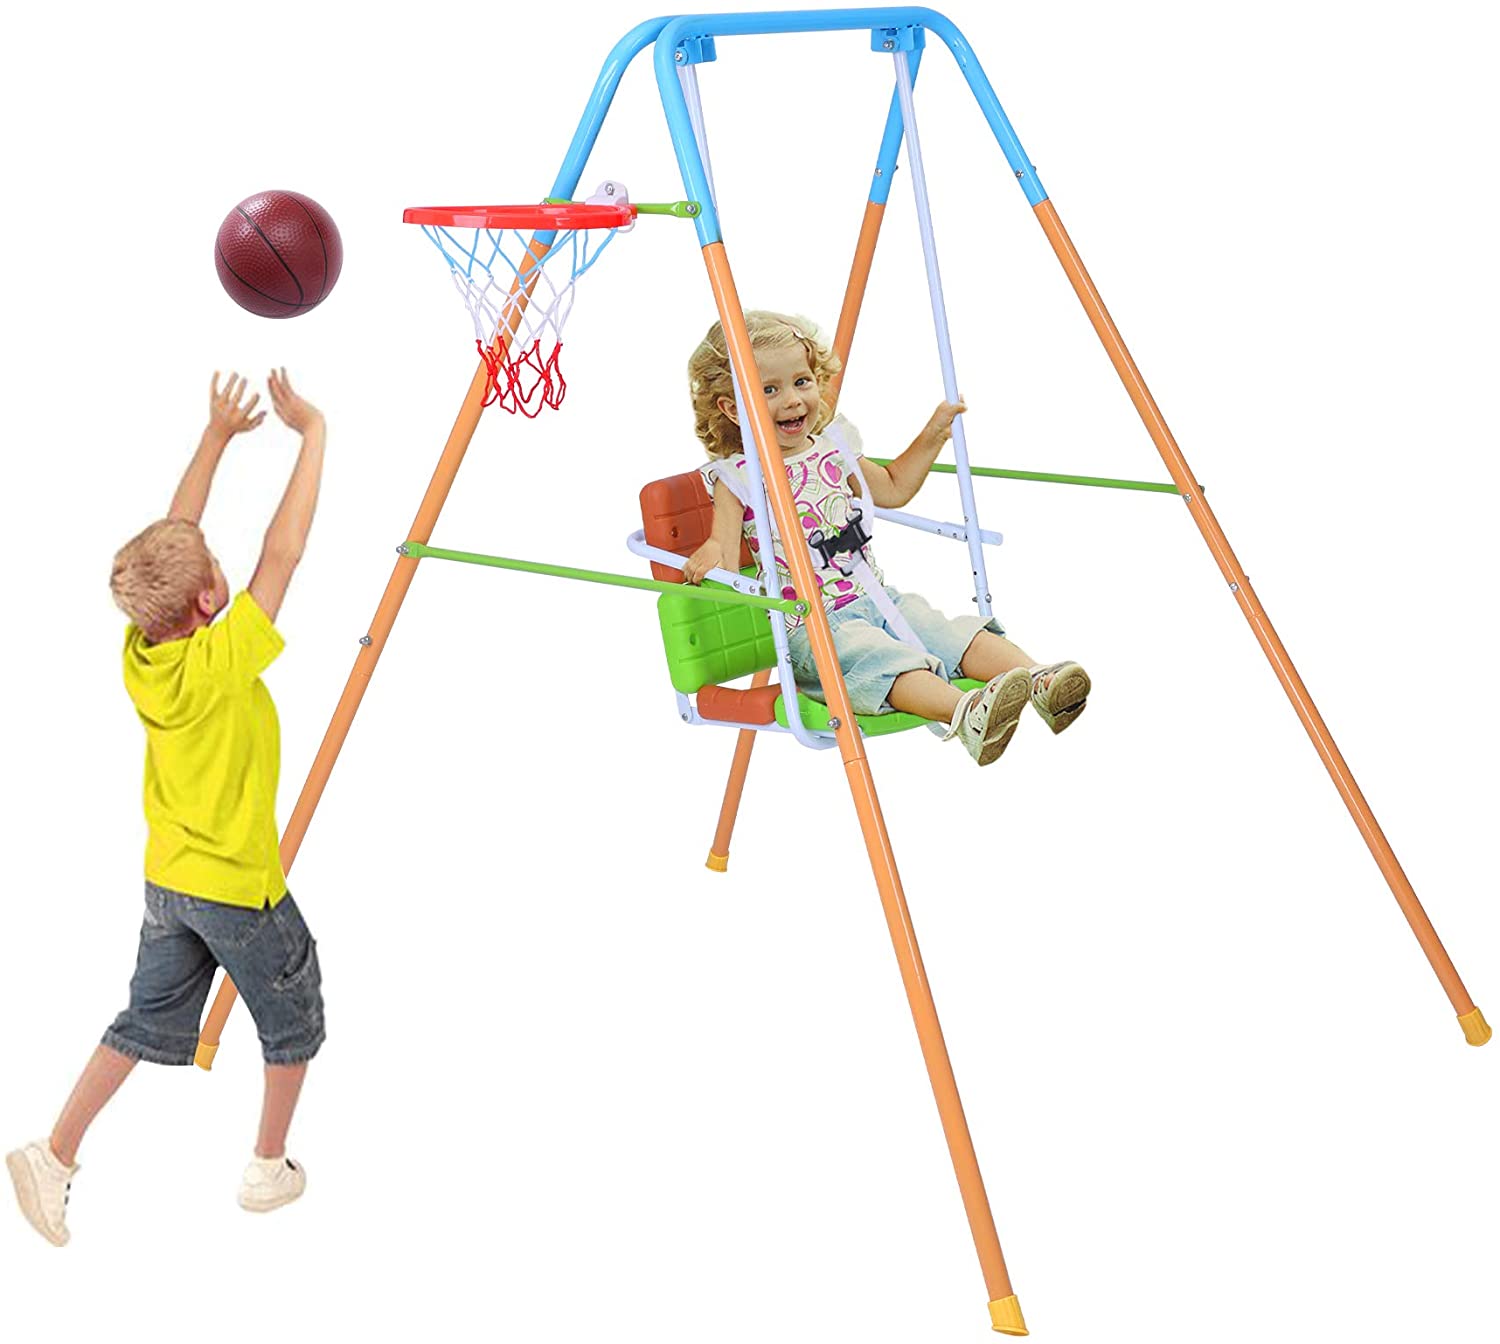 Toddler Swing Playset | 2 in 1 Swing Basketball Combination Swing Toys Set Indoor and Outdoor Playground Swing Seat for Kids Boys Girls (Chair)